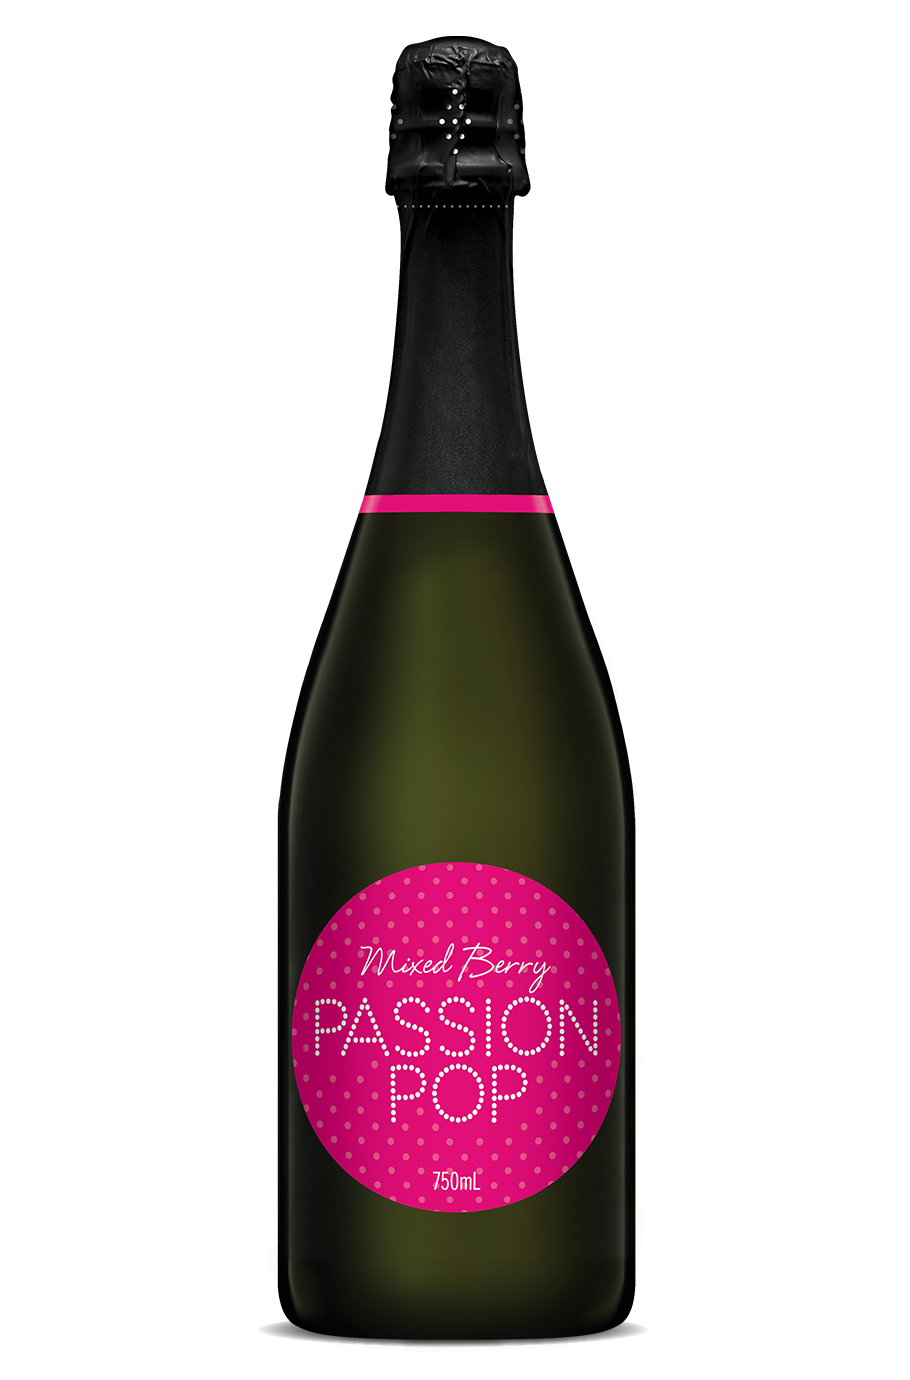 Passion Pop Mixed Berry 750ml